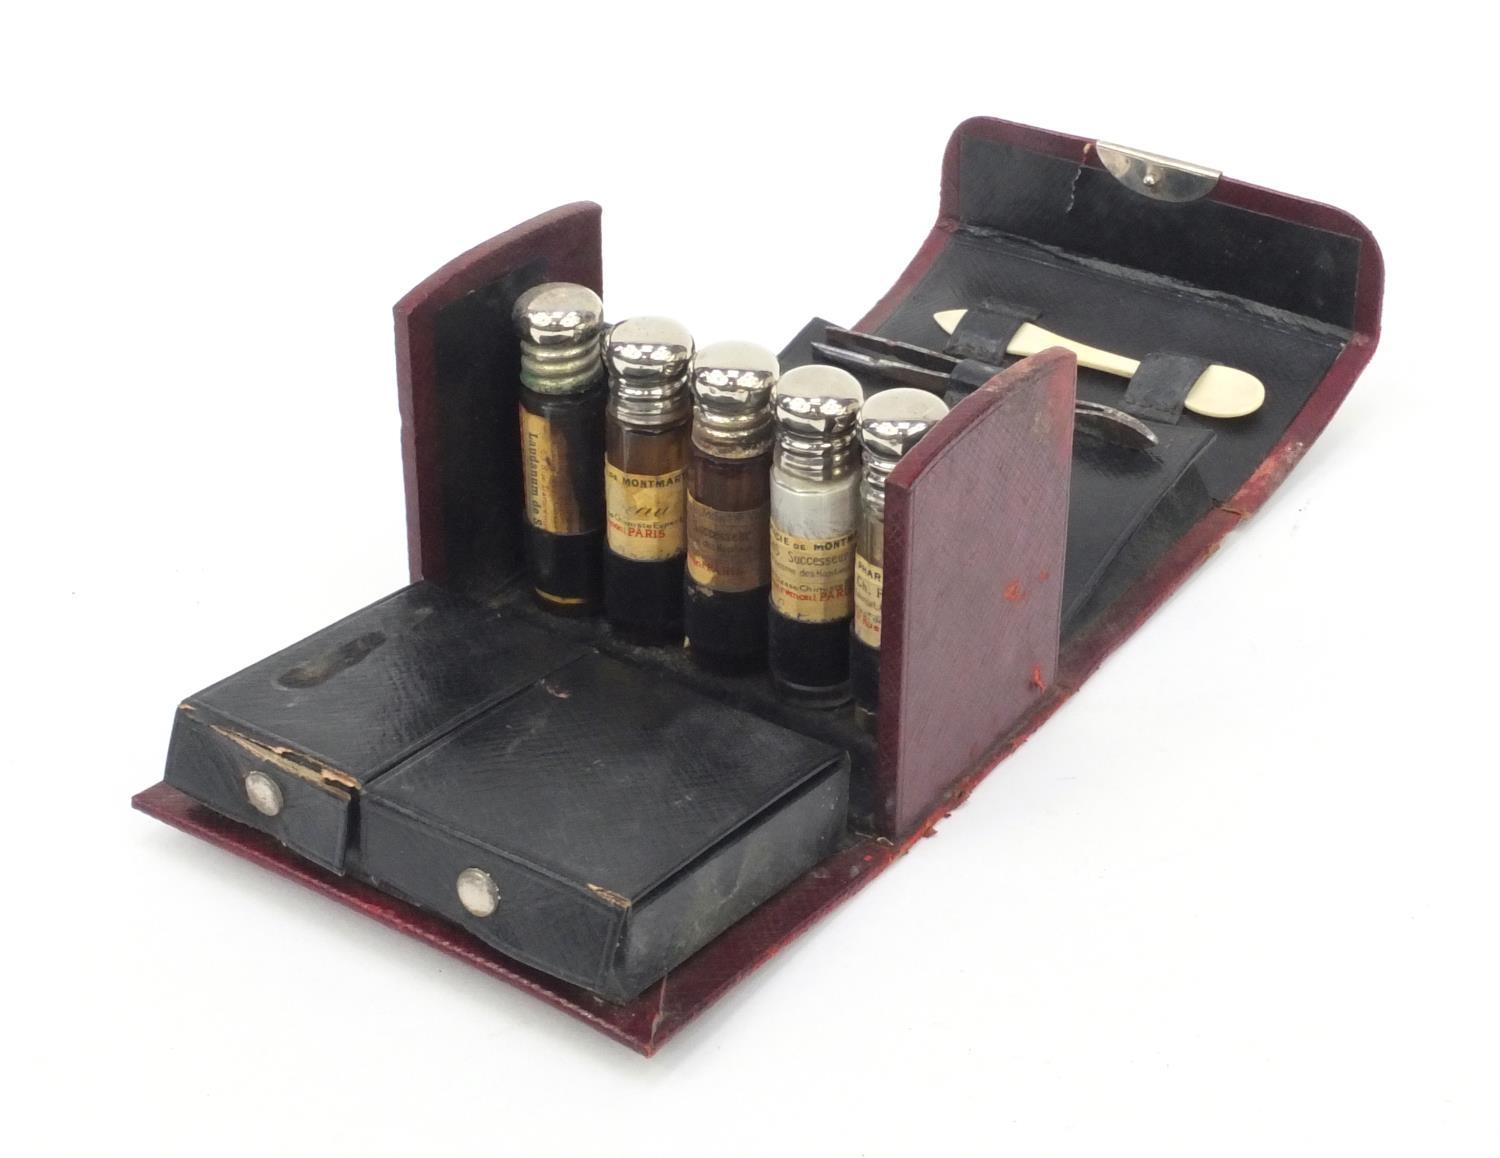 French doctor's red leather travelling case housing a selection of glass bottles, spoon, penknife